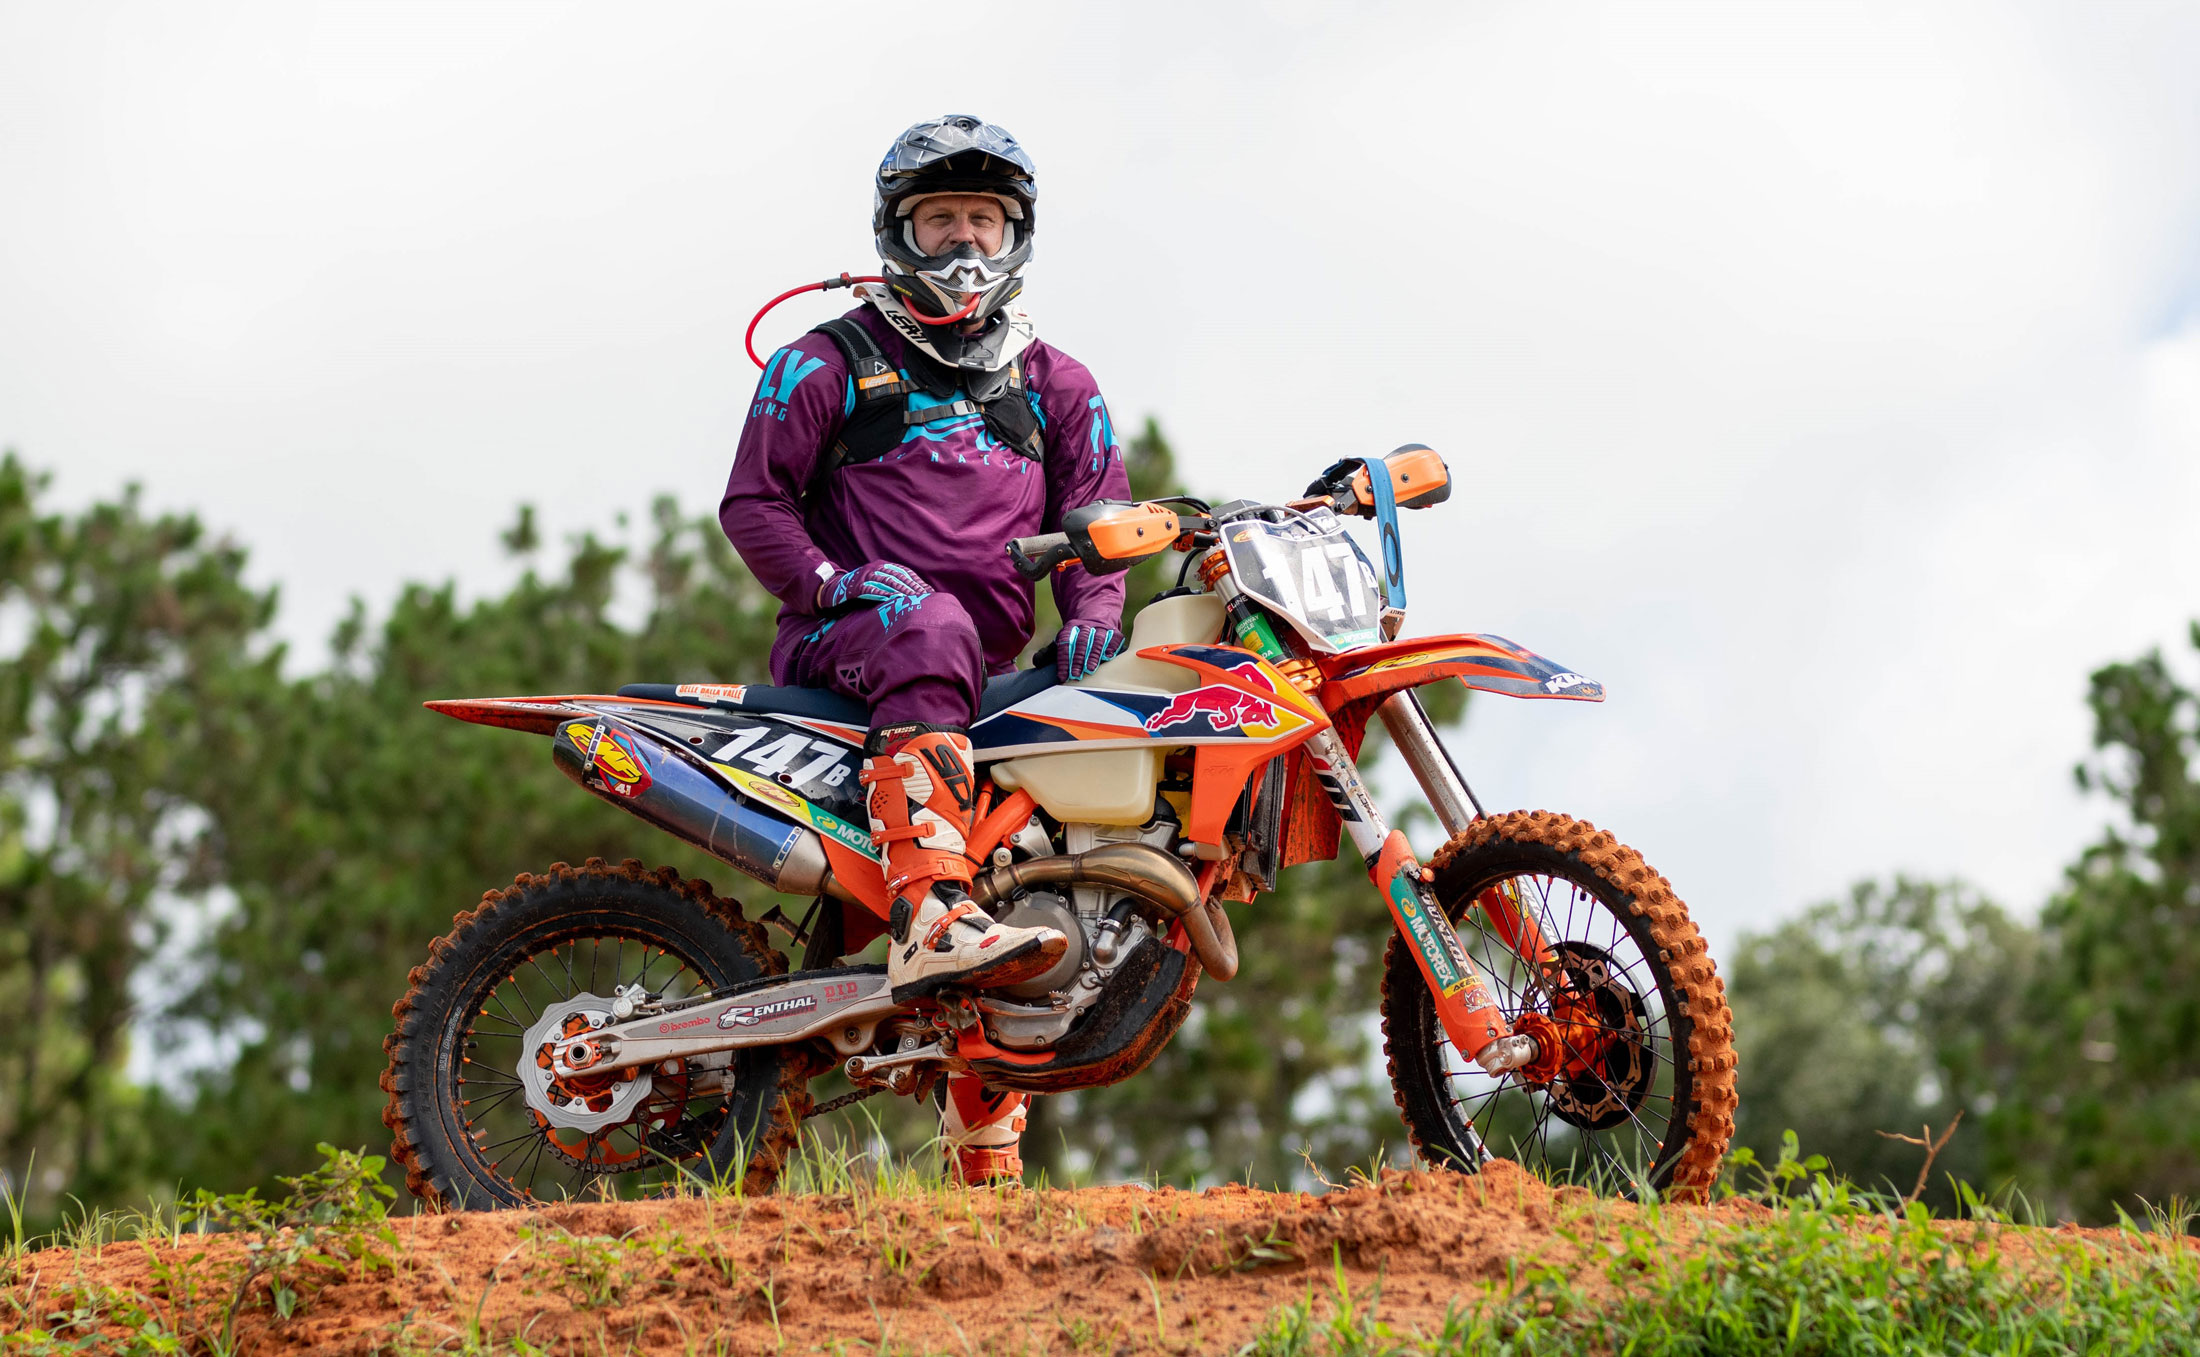 Dr. Randy K. Avent, president of Florida Polytechnic University, rides his KTM 350 dirt bike in Mulberry, Florida. Avent regularly competes in races throughout the state.